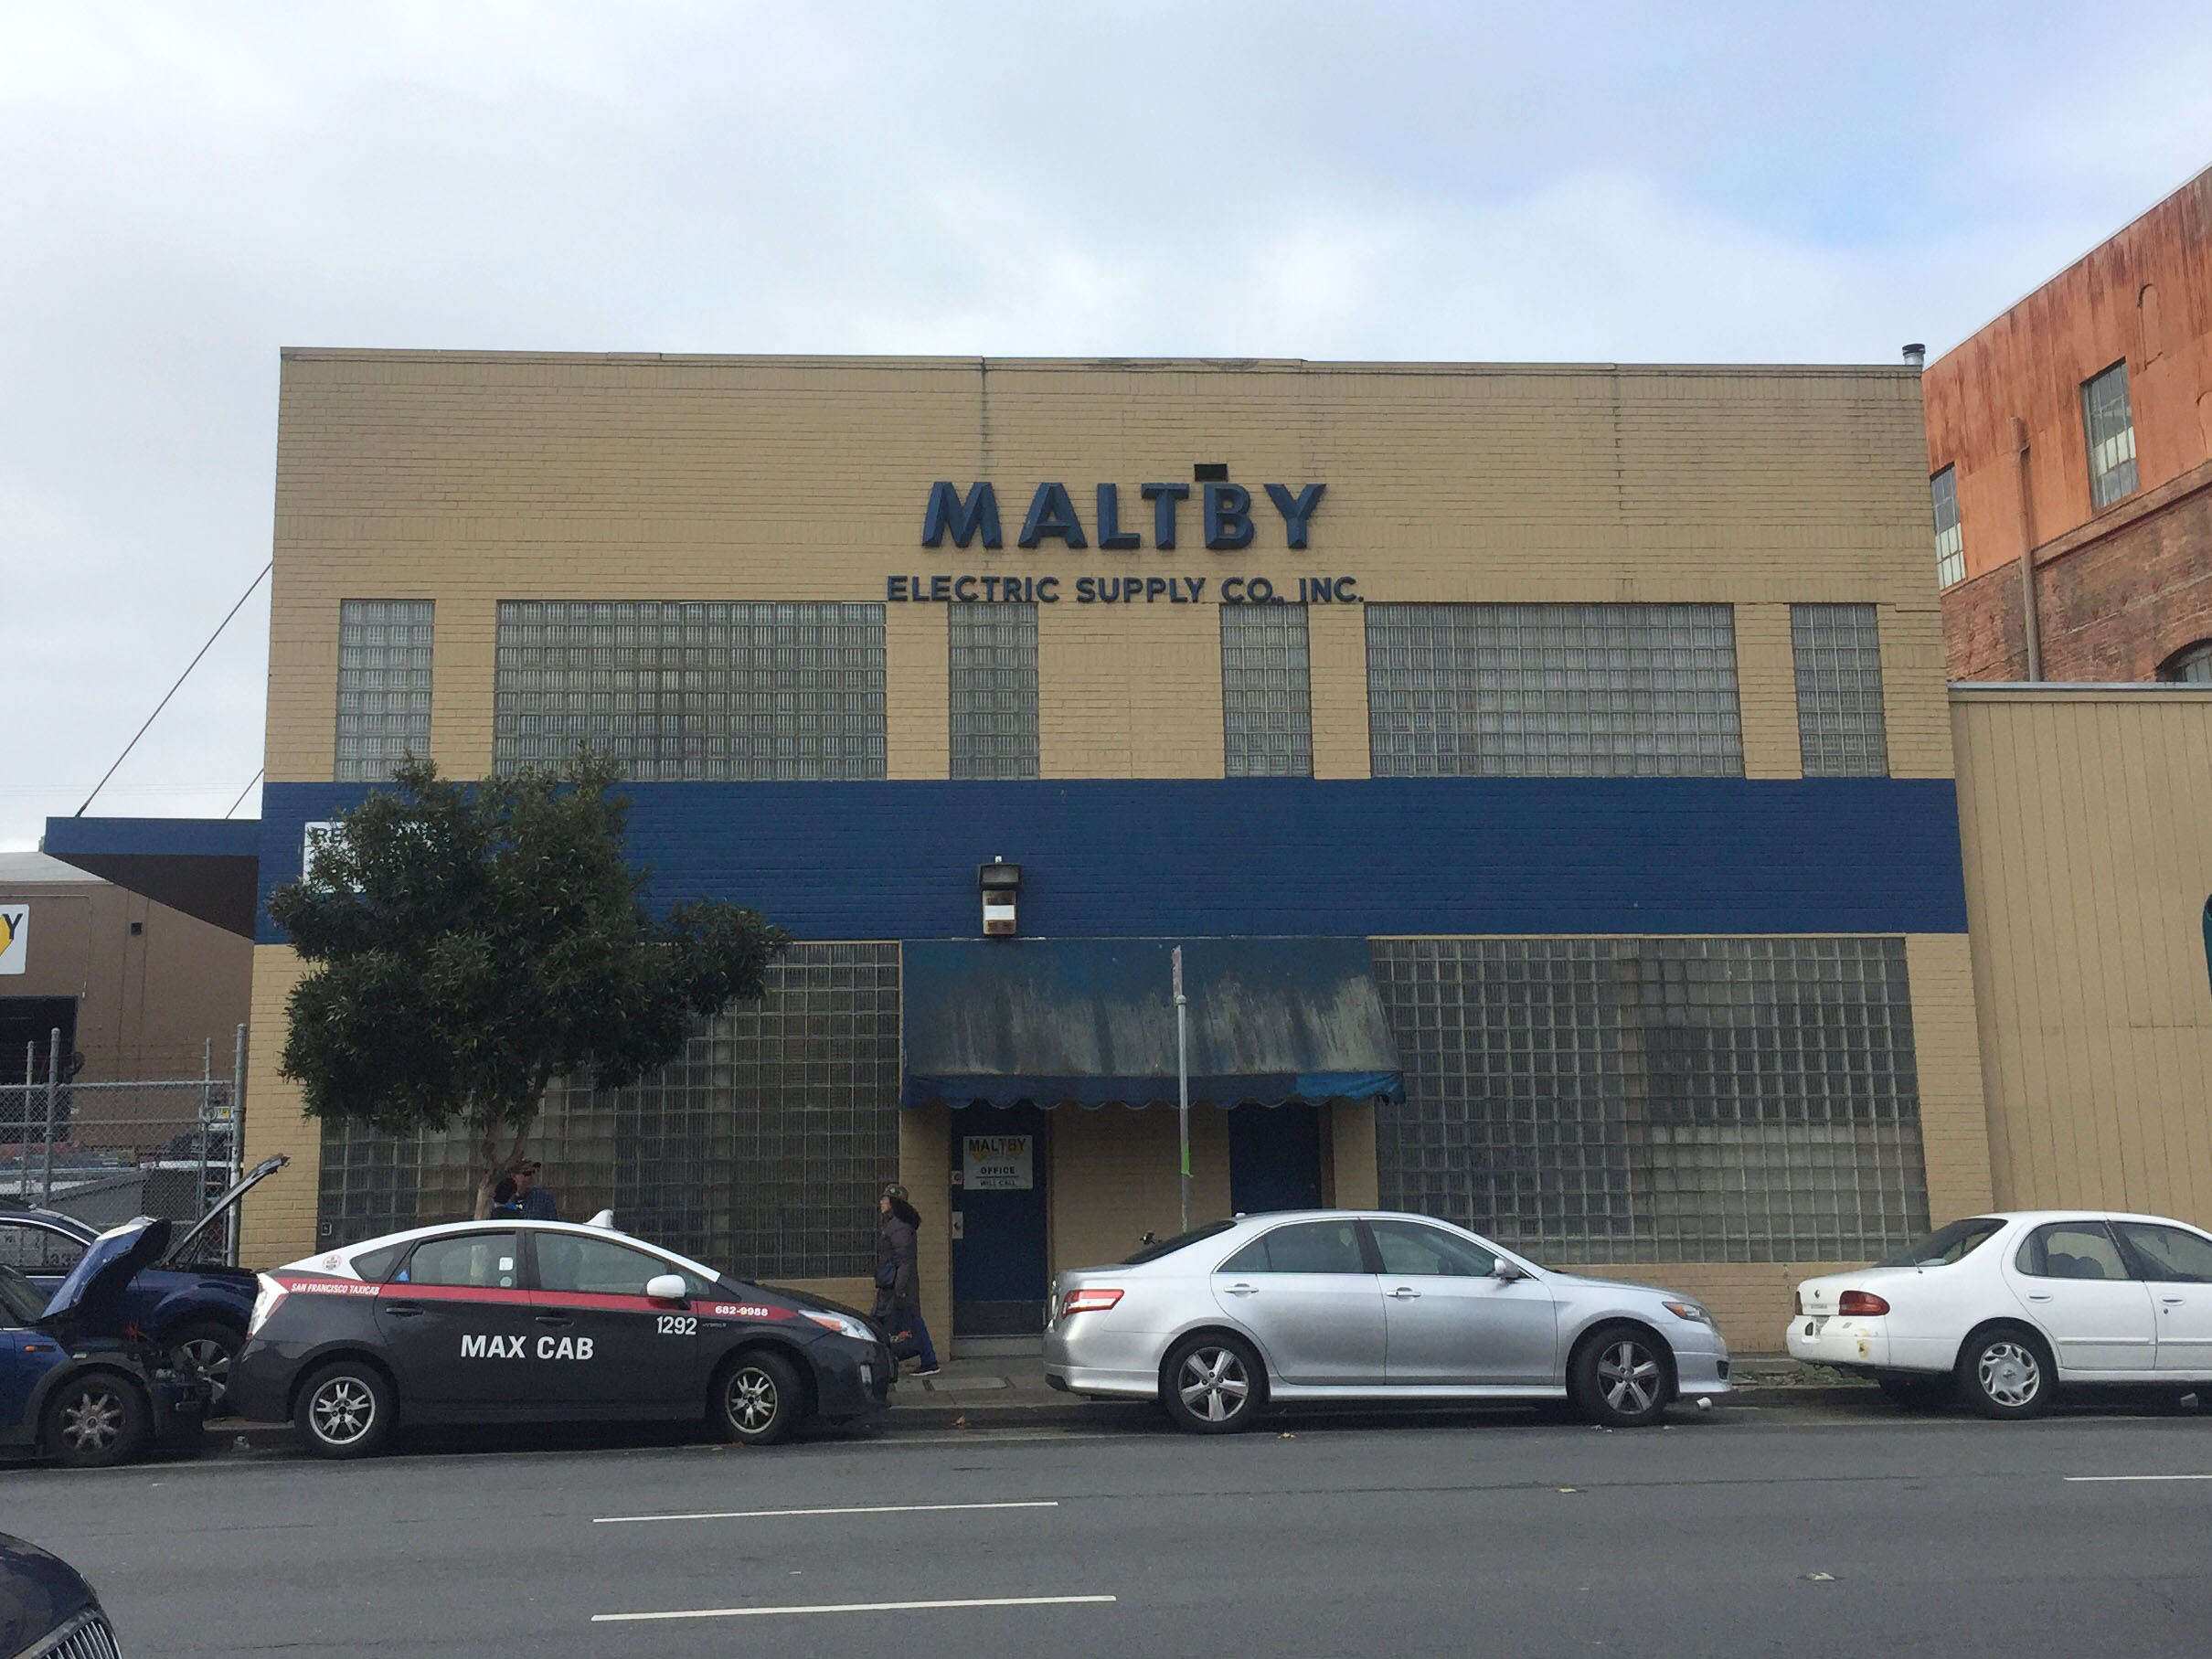 MALTBY electric co storefront